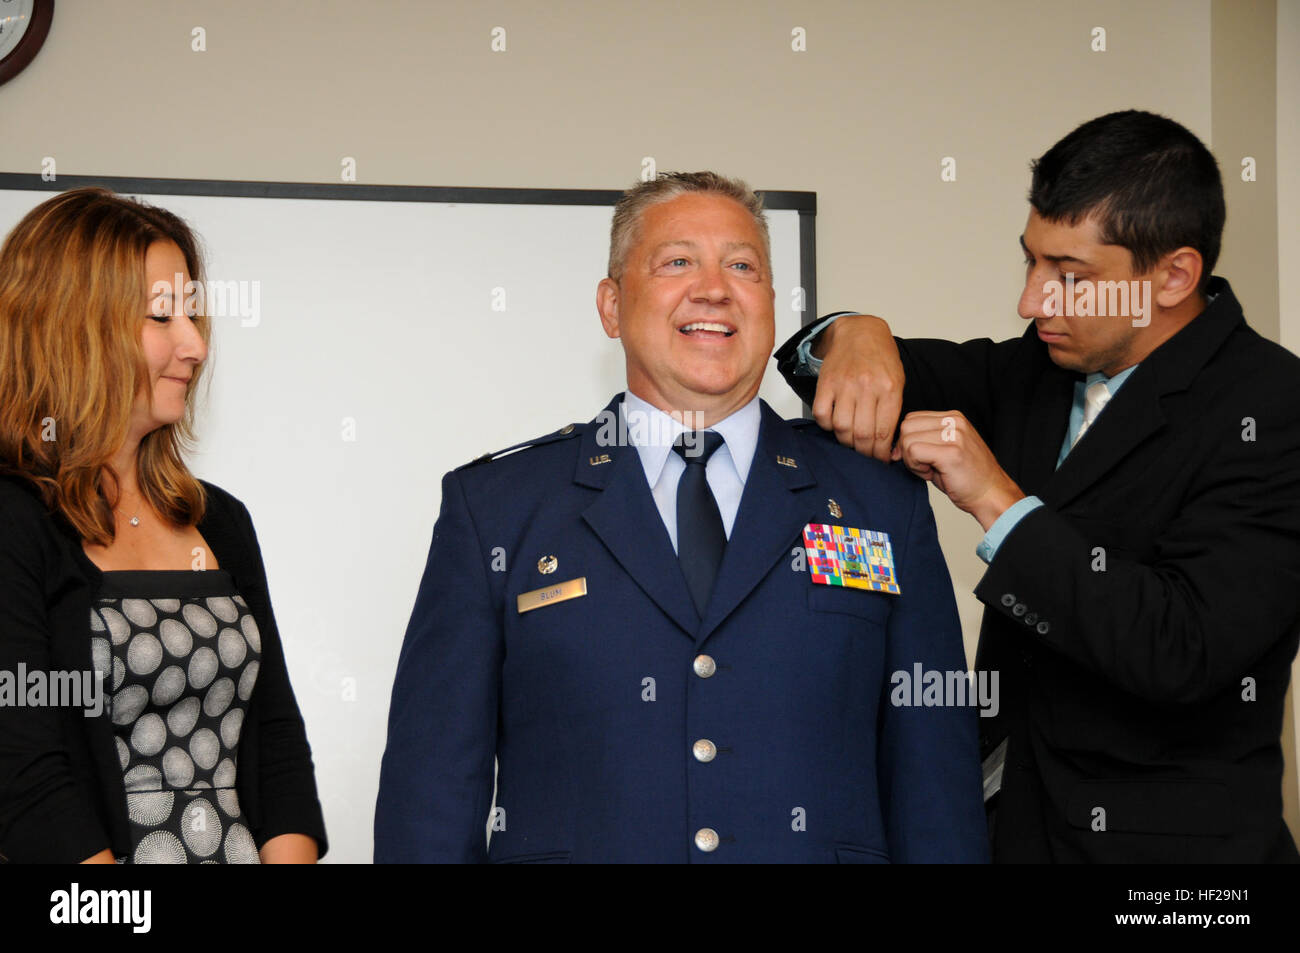 Newly promoted Col. Scott Blum, 108th Medical Group commander, stands proudly as his wife, Patricia, and son, Tyler, pin colonel rank on his service dress coat at his promotion ceremony at Joint Base McGuire-Dix-Lakehurst, N.J., July 7, 2014. (U.S. Air National Guard photo by Senior Airman Kellyann Novak/Released) Col. Blum's promotion ceremony 140707-Z-ME883-019 Stock Photo